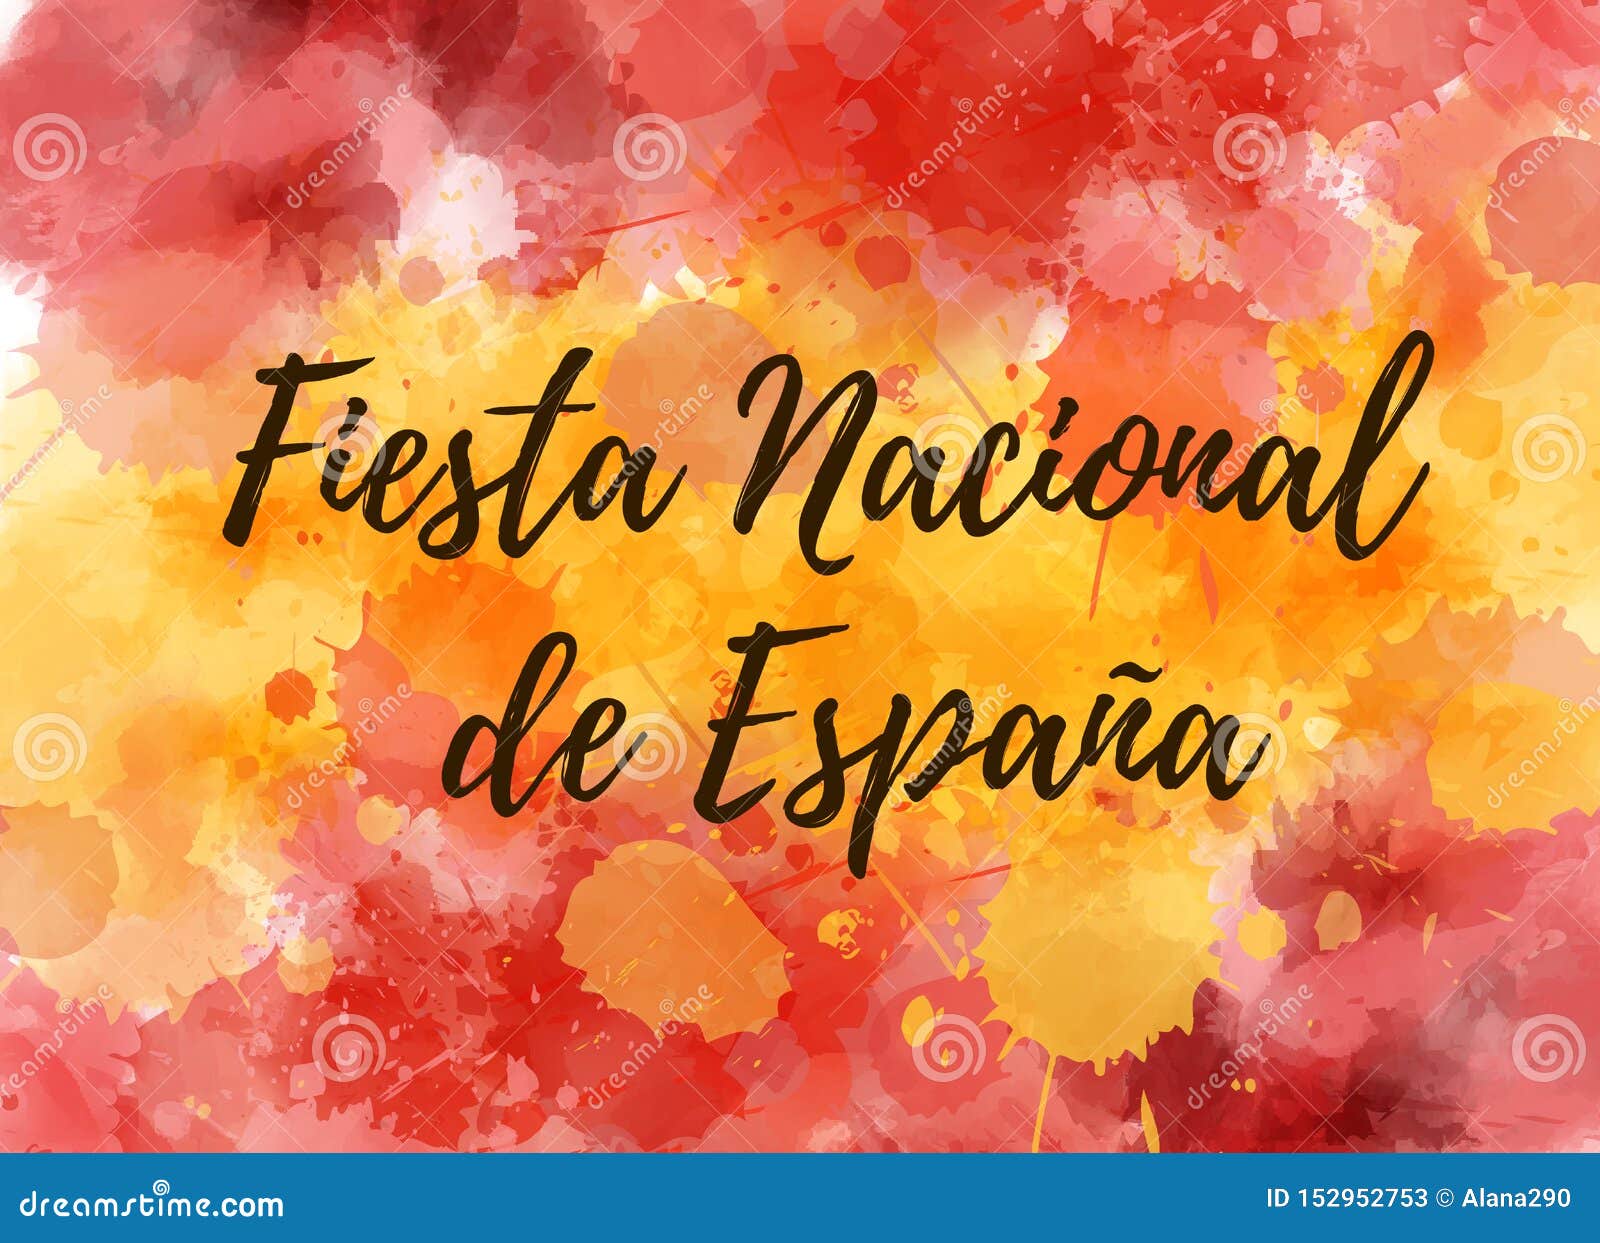 spain national day